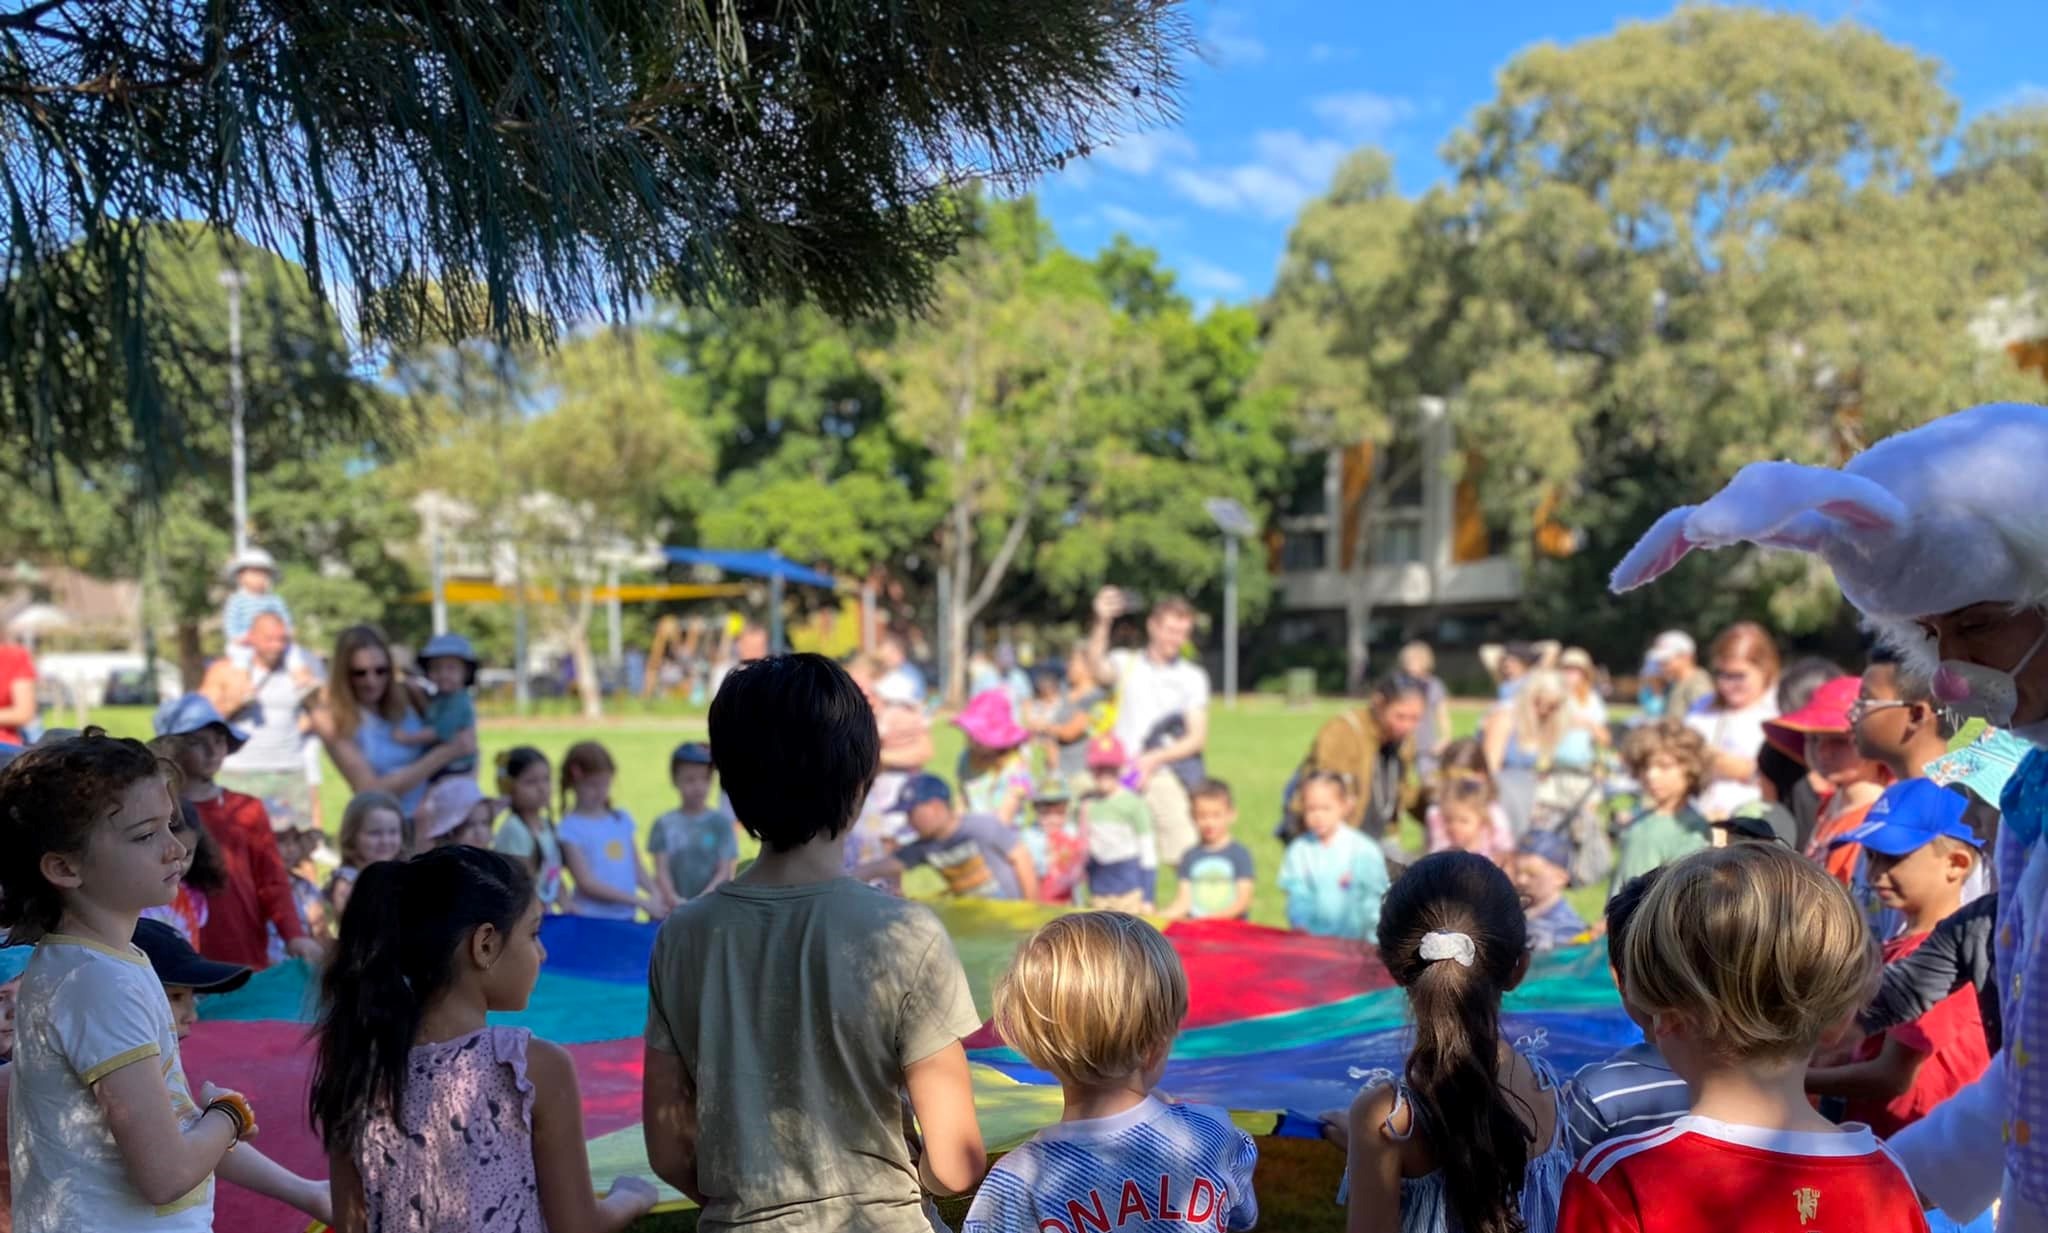 Randwick celebrates Easter weekend with food trucks, Easter egg hunt and music